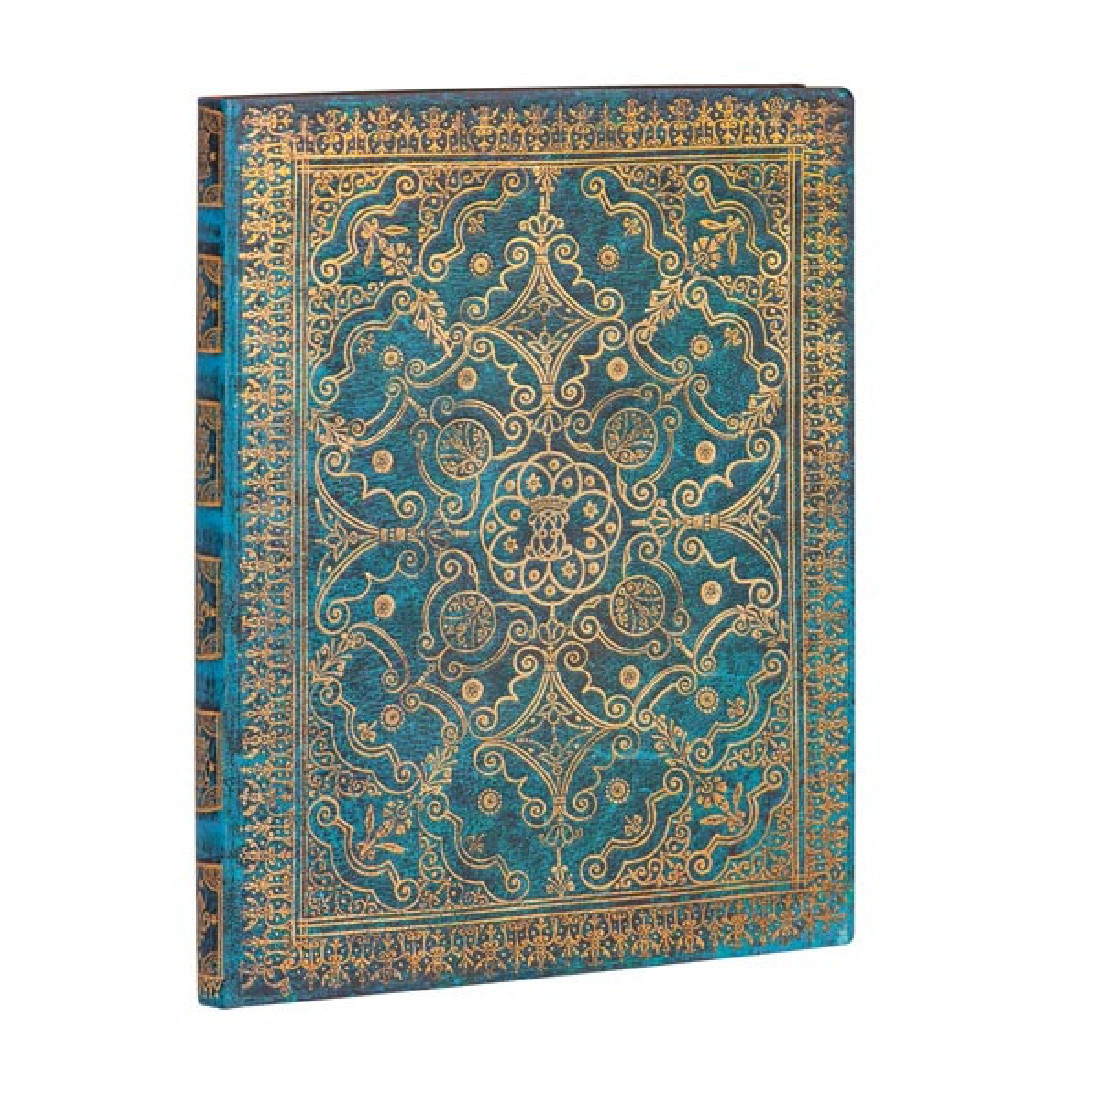 Notebook Flexi Ultra 23x18 (176 pages) Lined Azure Paperblanks